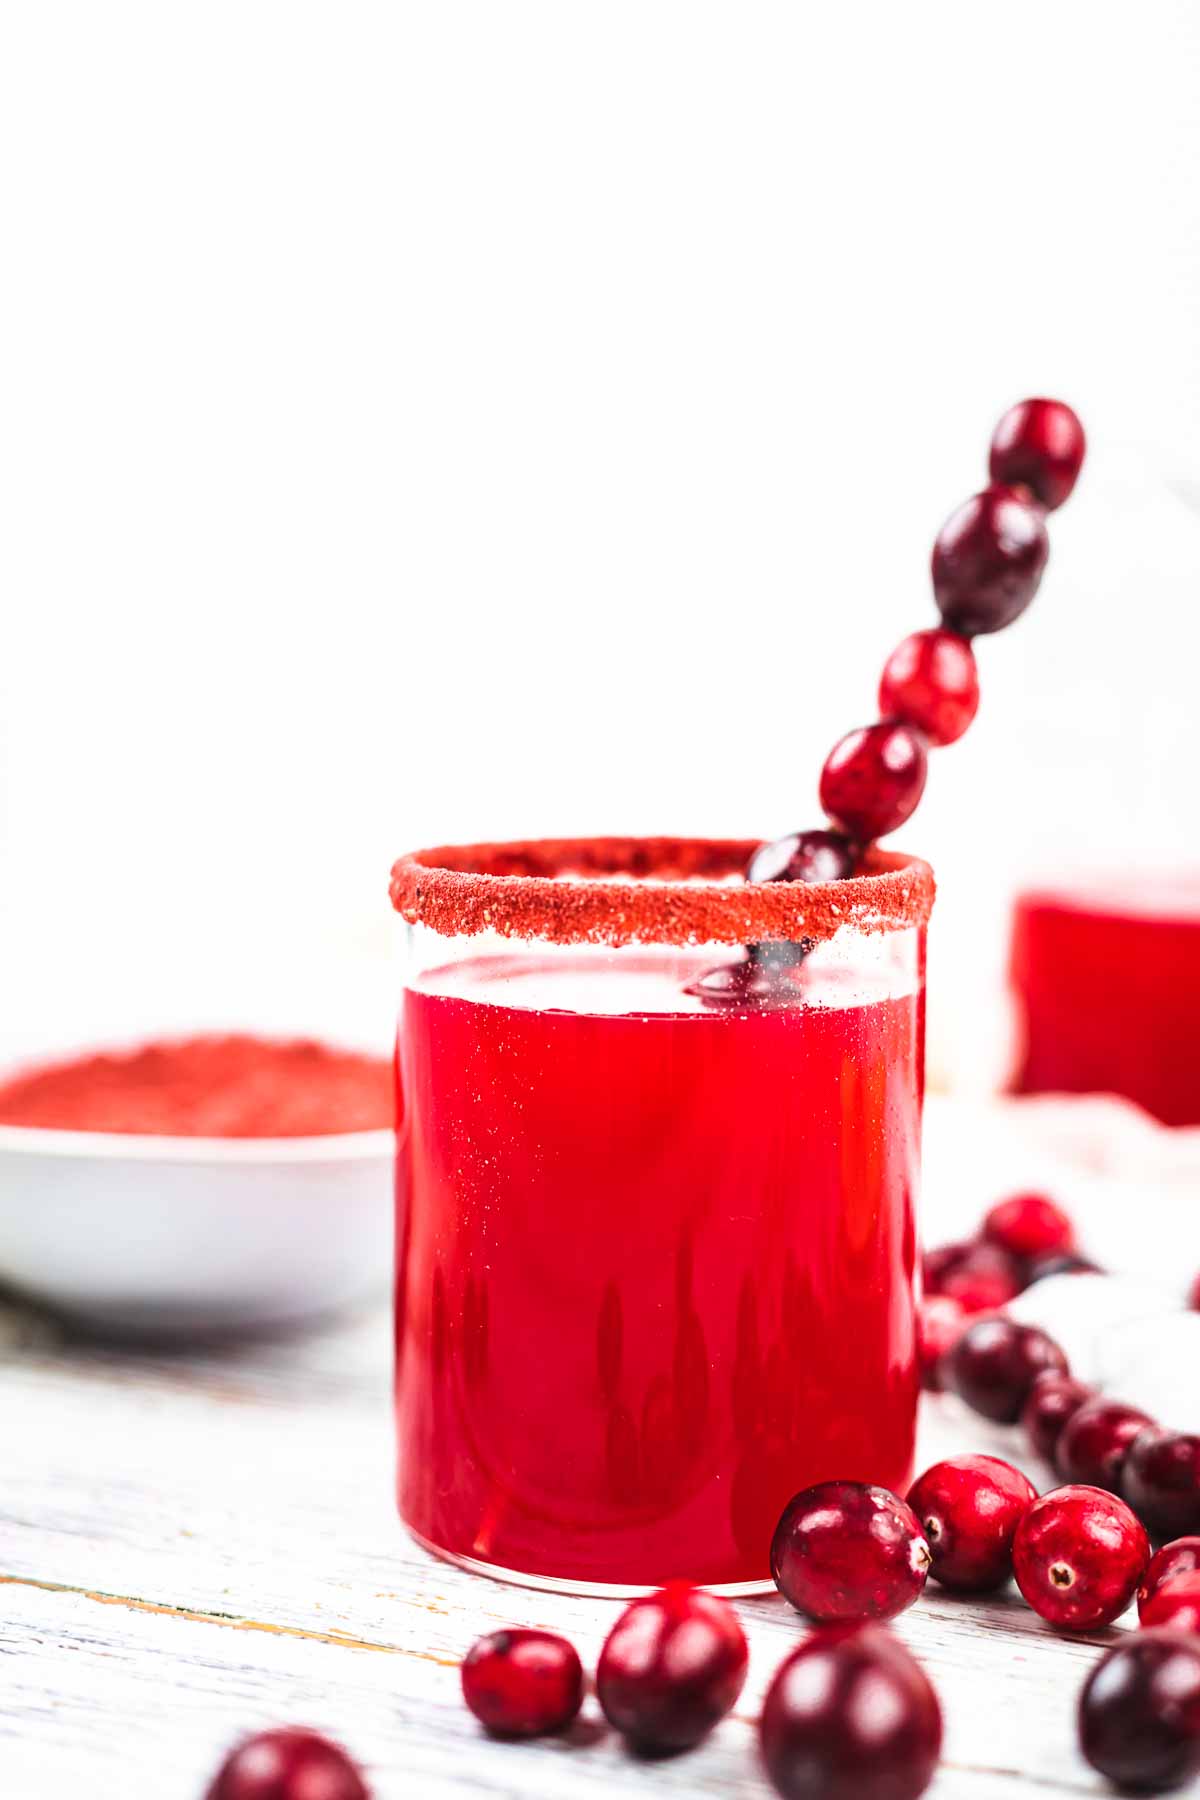 A glass of cranberry juice with a straw surrounded by cranberries.